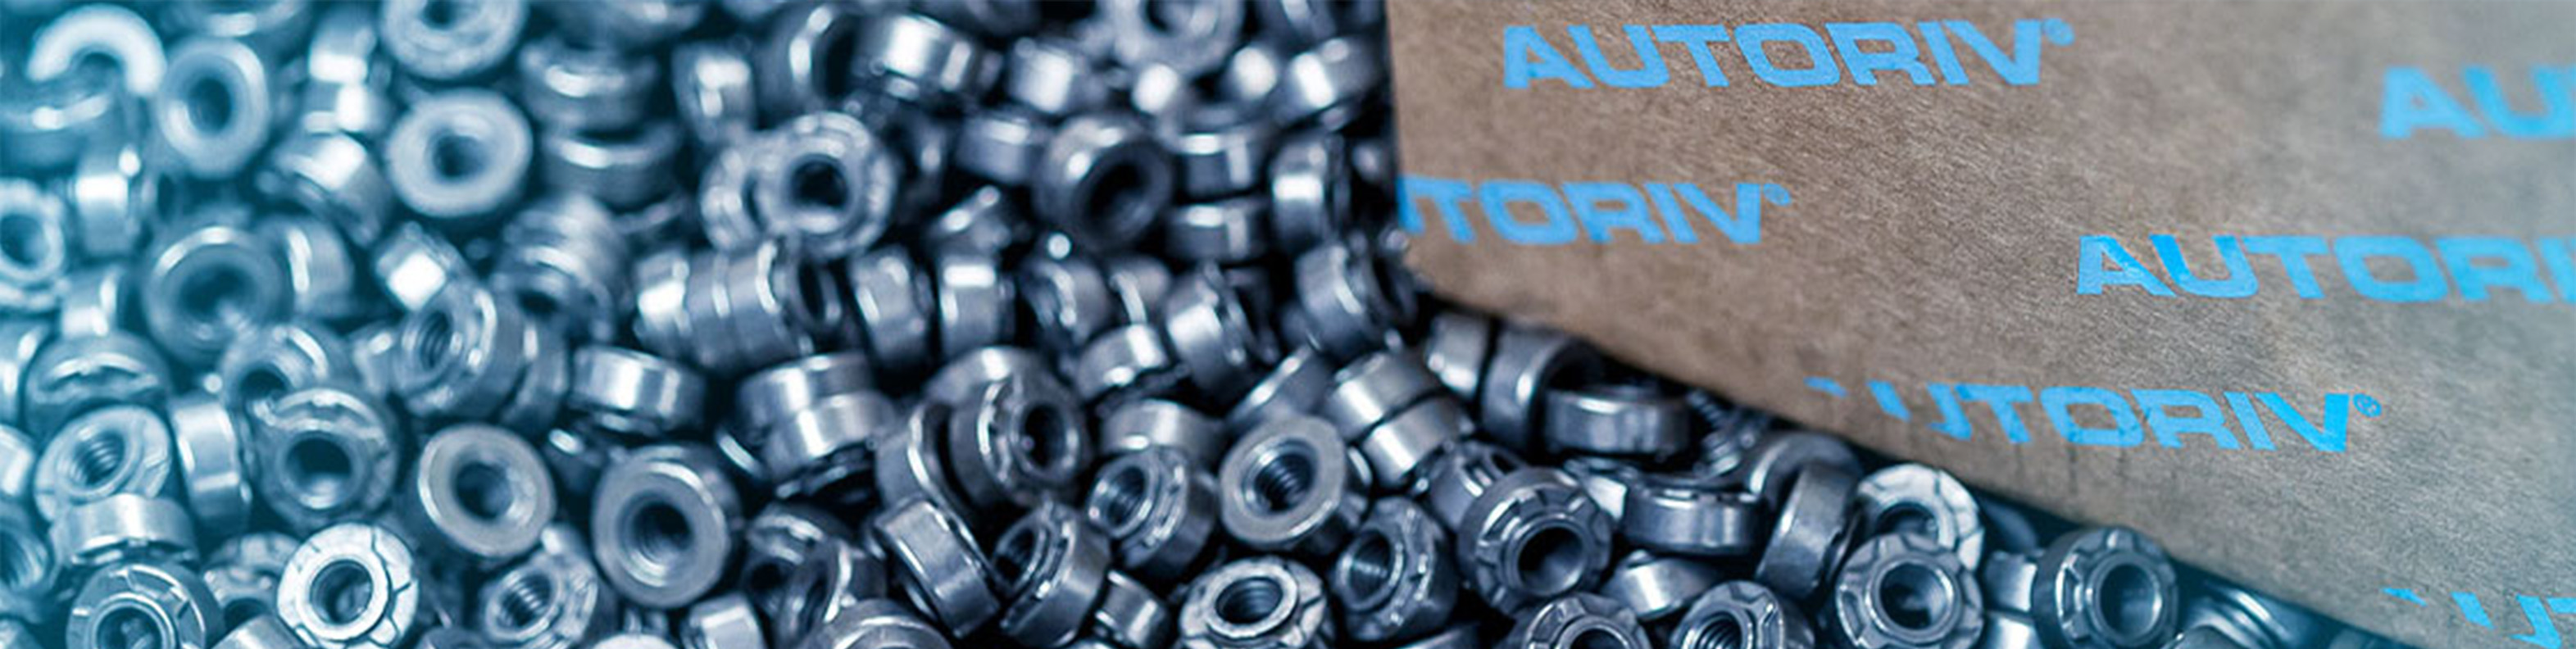 autoriv fasteners assembly systems spare parts online shop catalog order shipping parcel